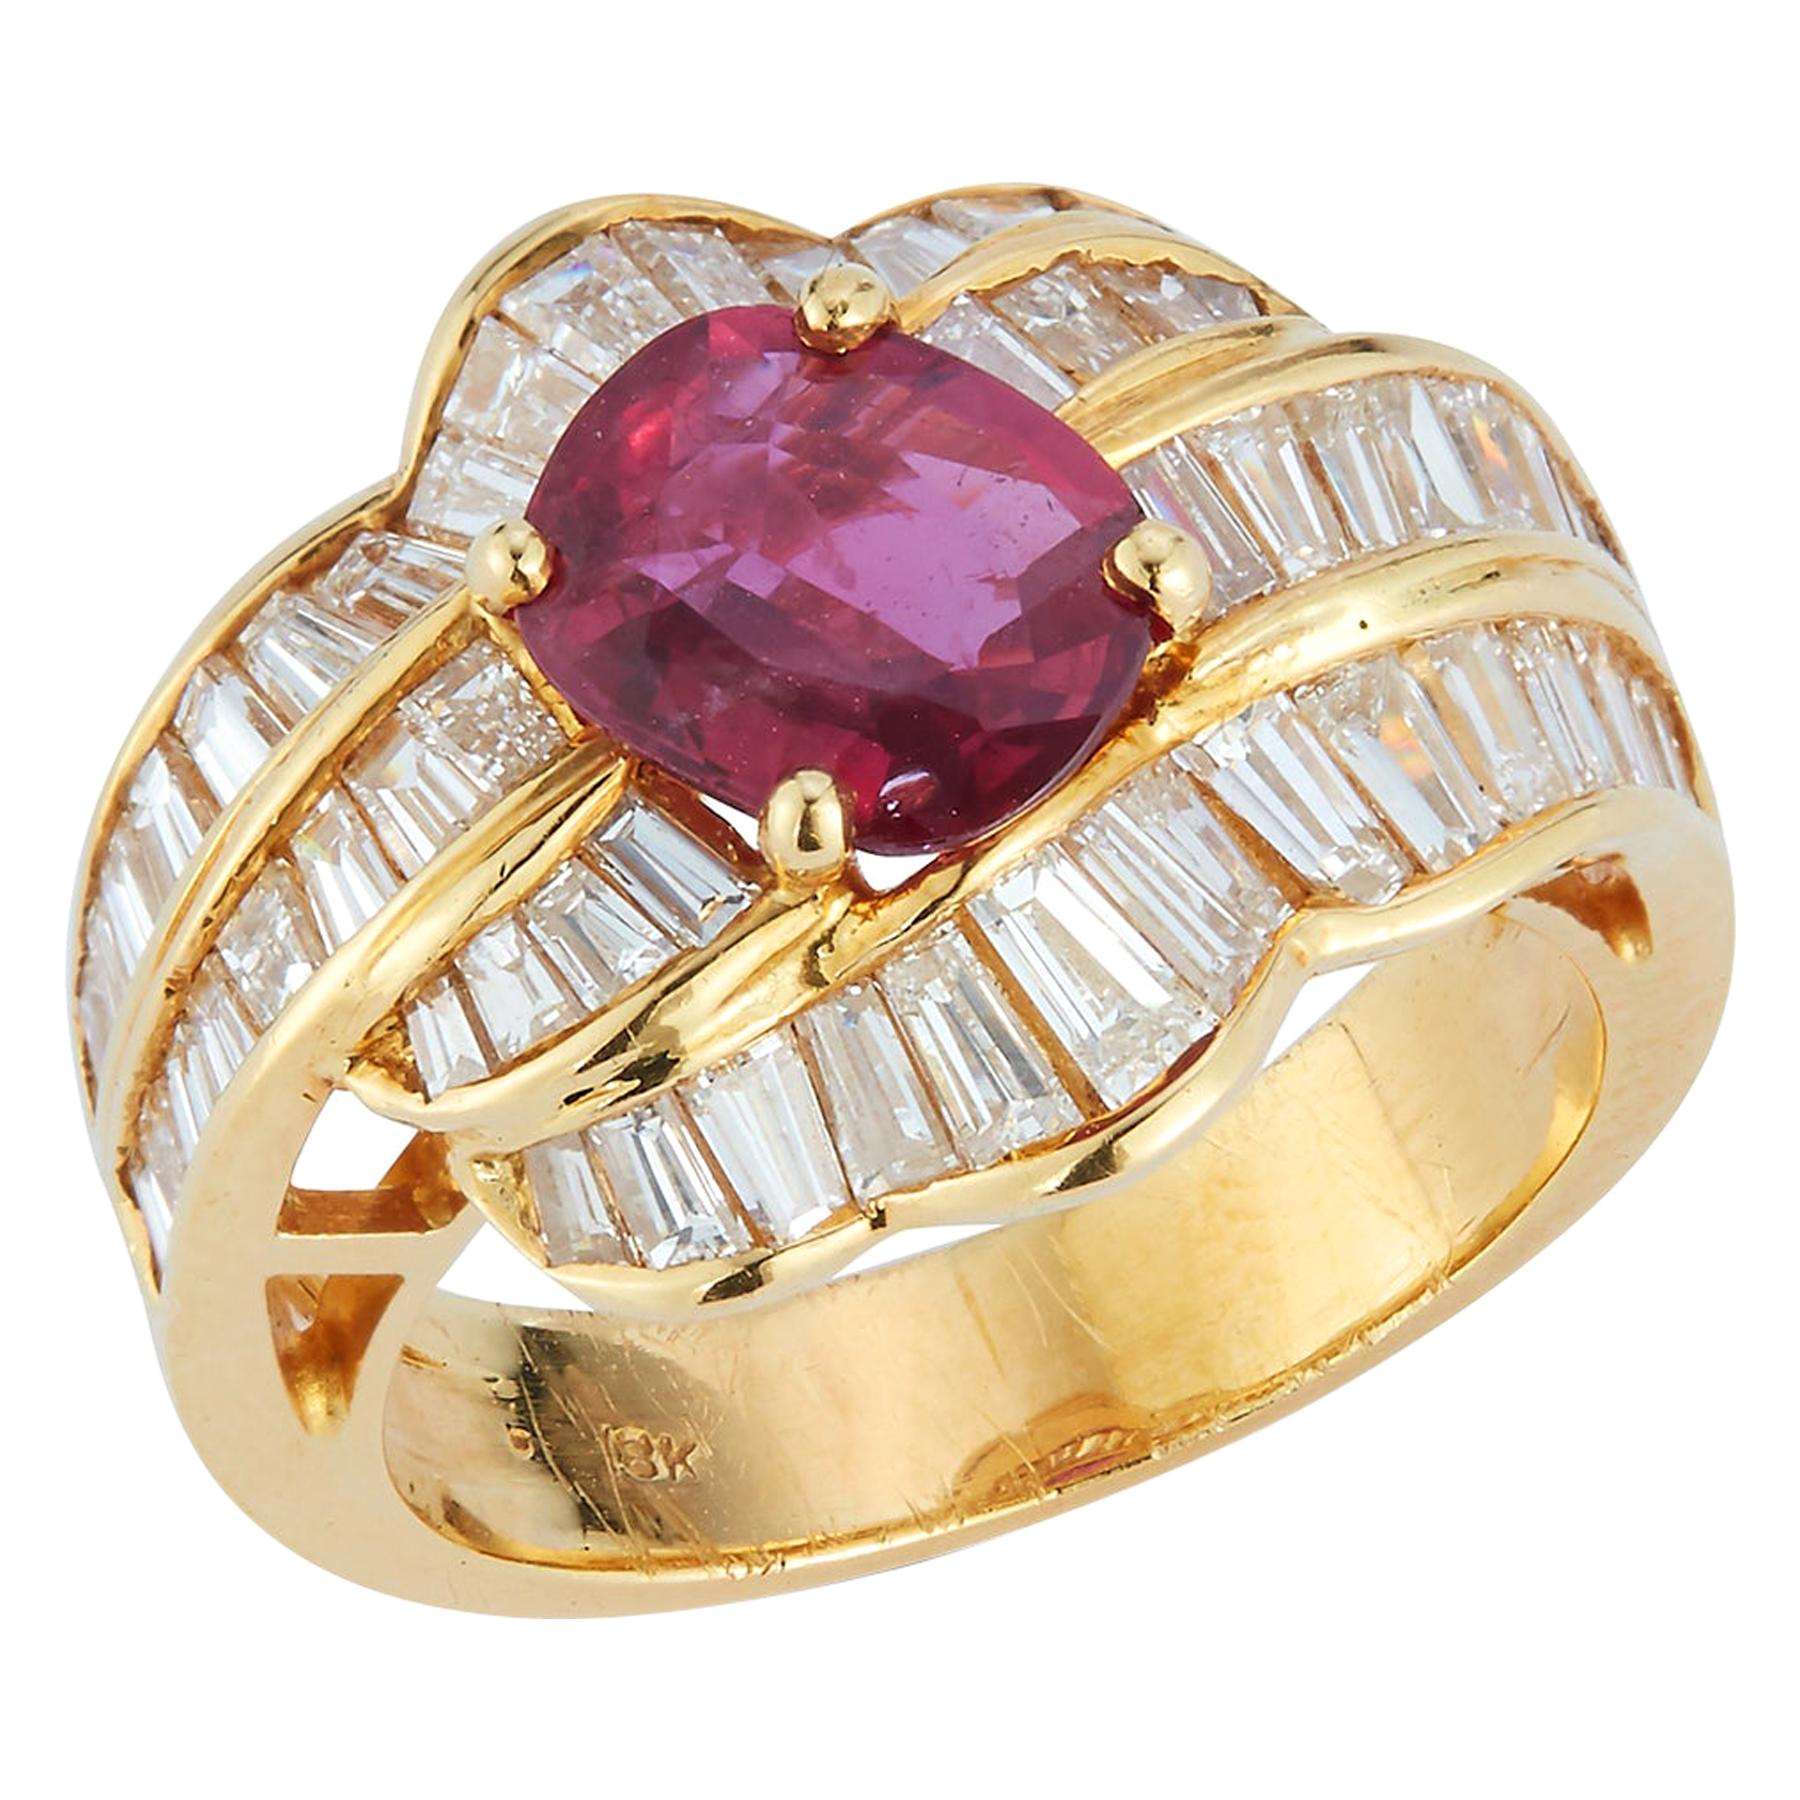 Ring with baguette-cut synthetic rubies, For Sale at 1stDibs